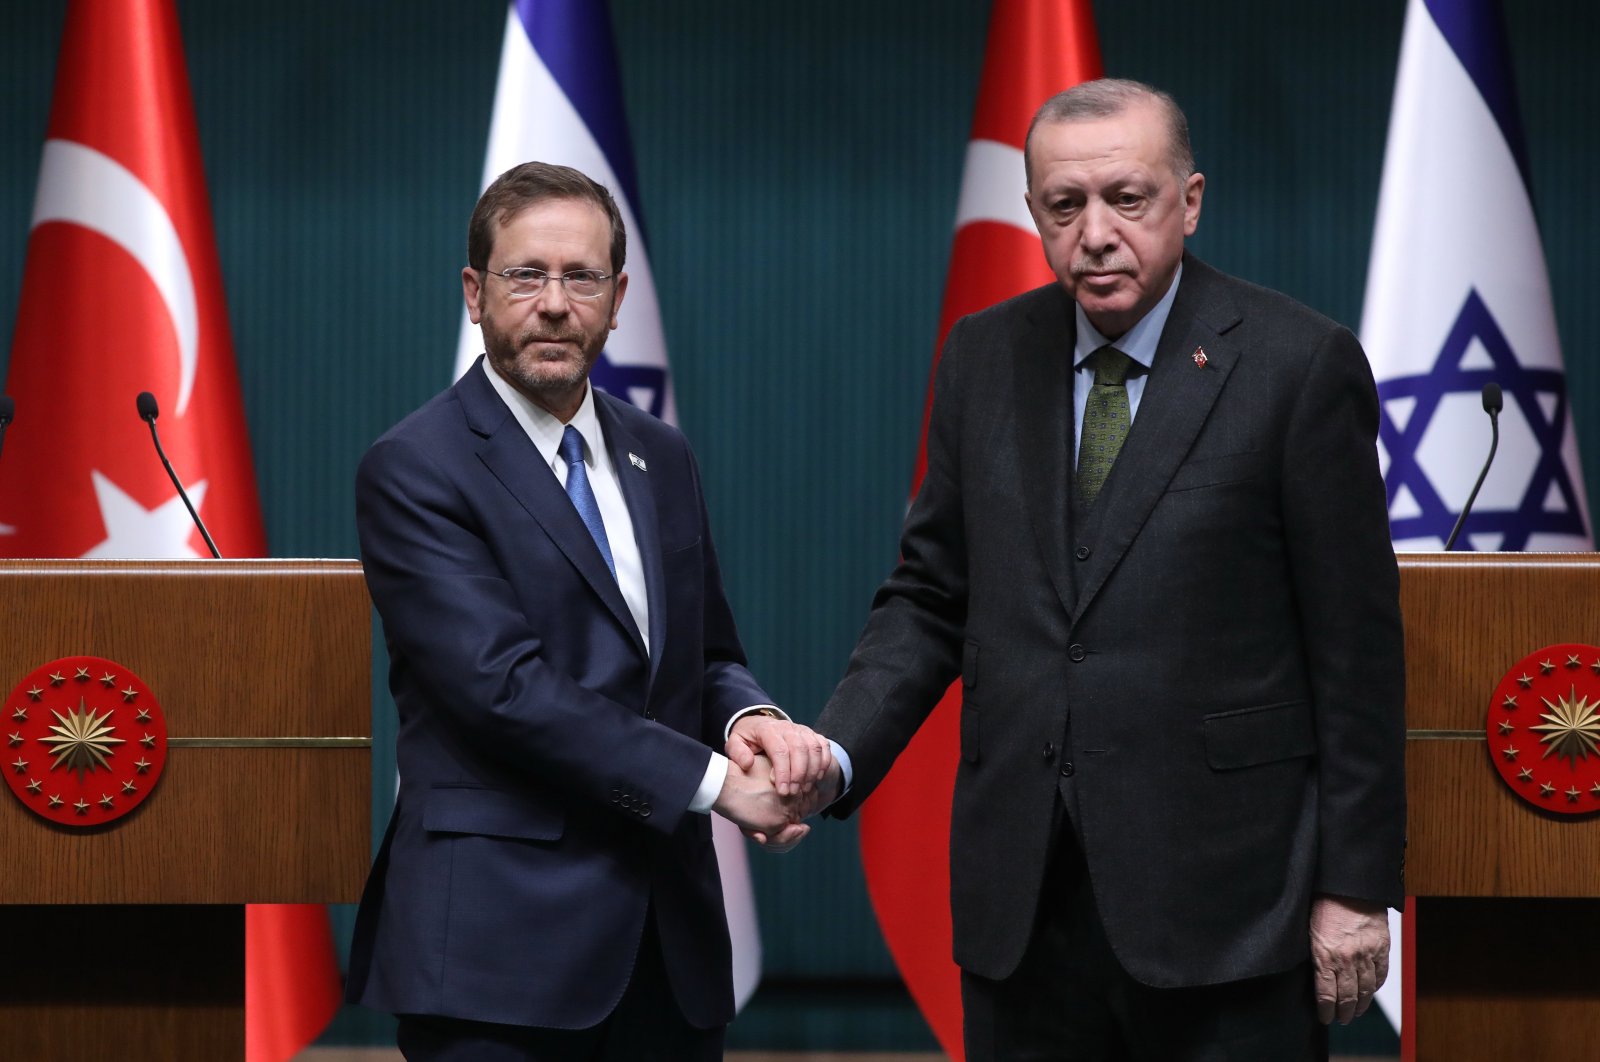 President Recep Tayyip Erdoğan and Israeli President Isaac Herzog attend a press conference after their meeting in Ankara, Turkey, March 9, 2022. (EPA Photo)